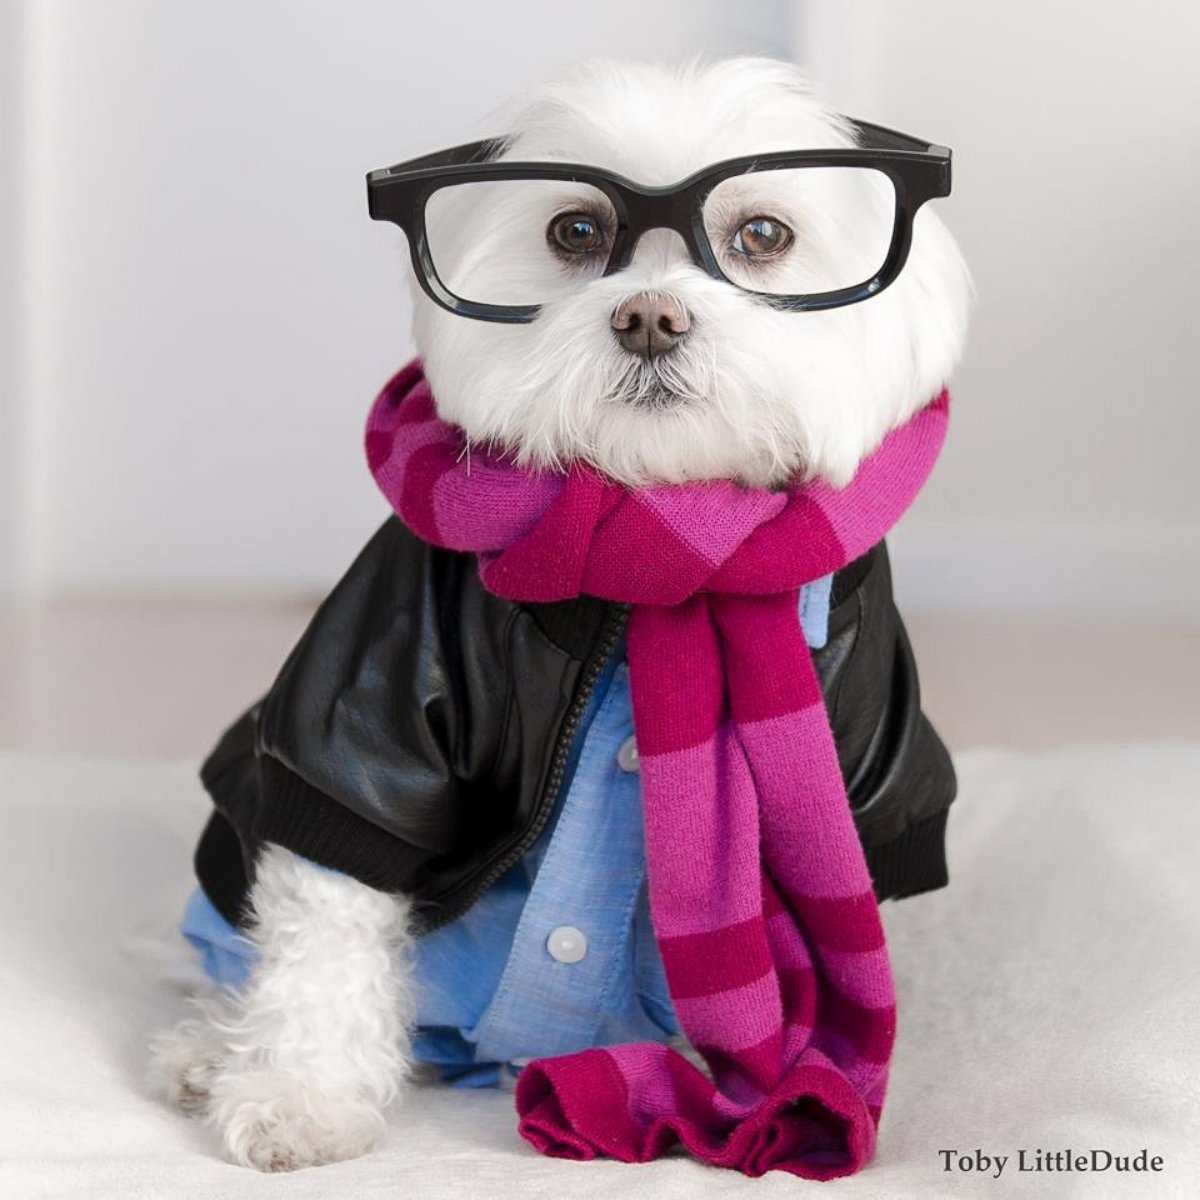 PHOTO: Hipster dog Toby wears thick-rimmed glasses and has more than 86,000 Instagram followers.